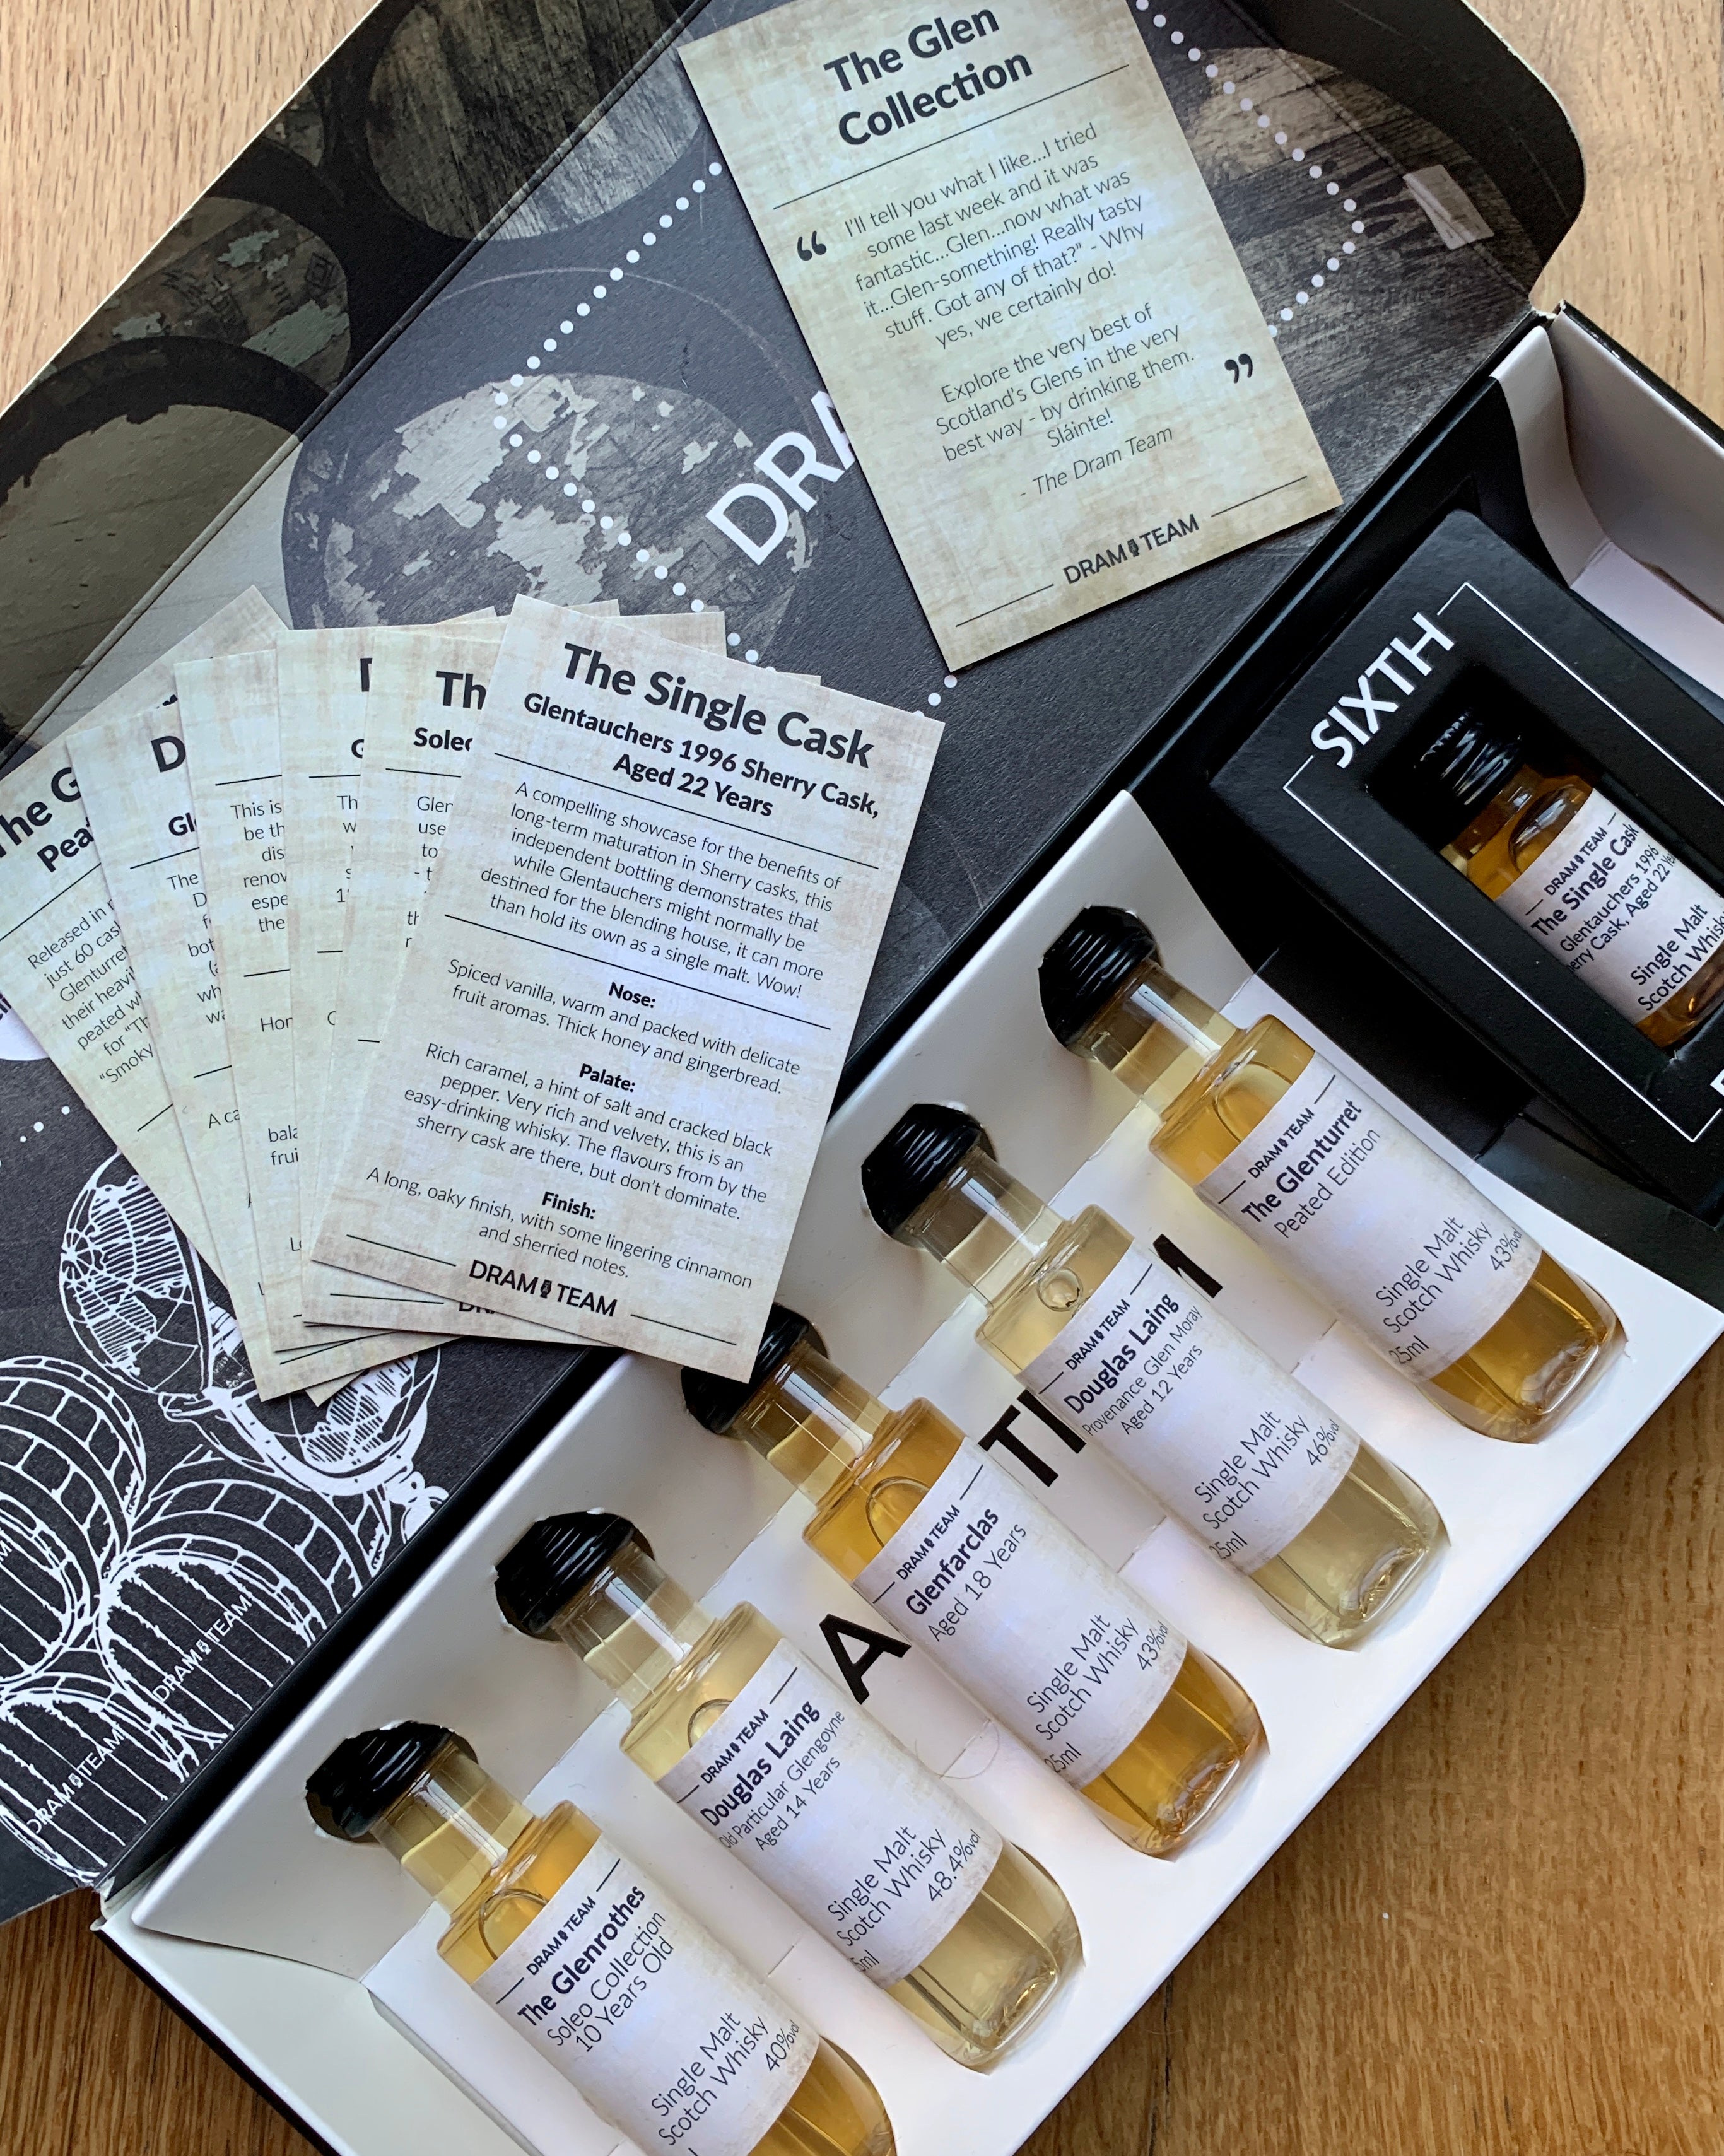 The Dram Team Glen Collection whisky subscription club